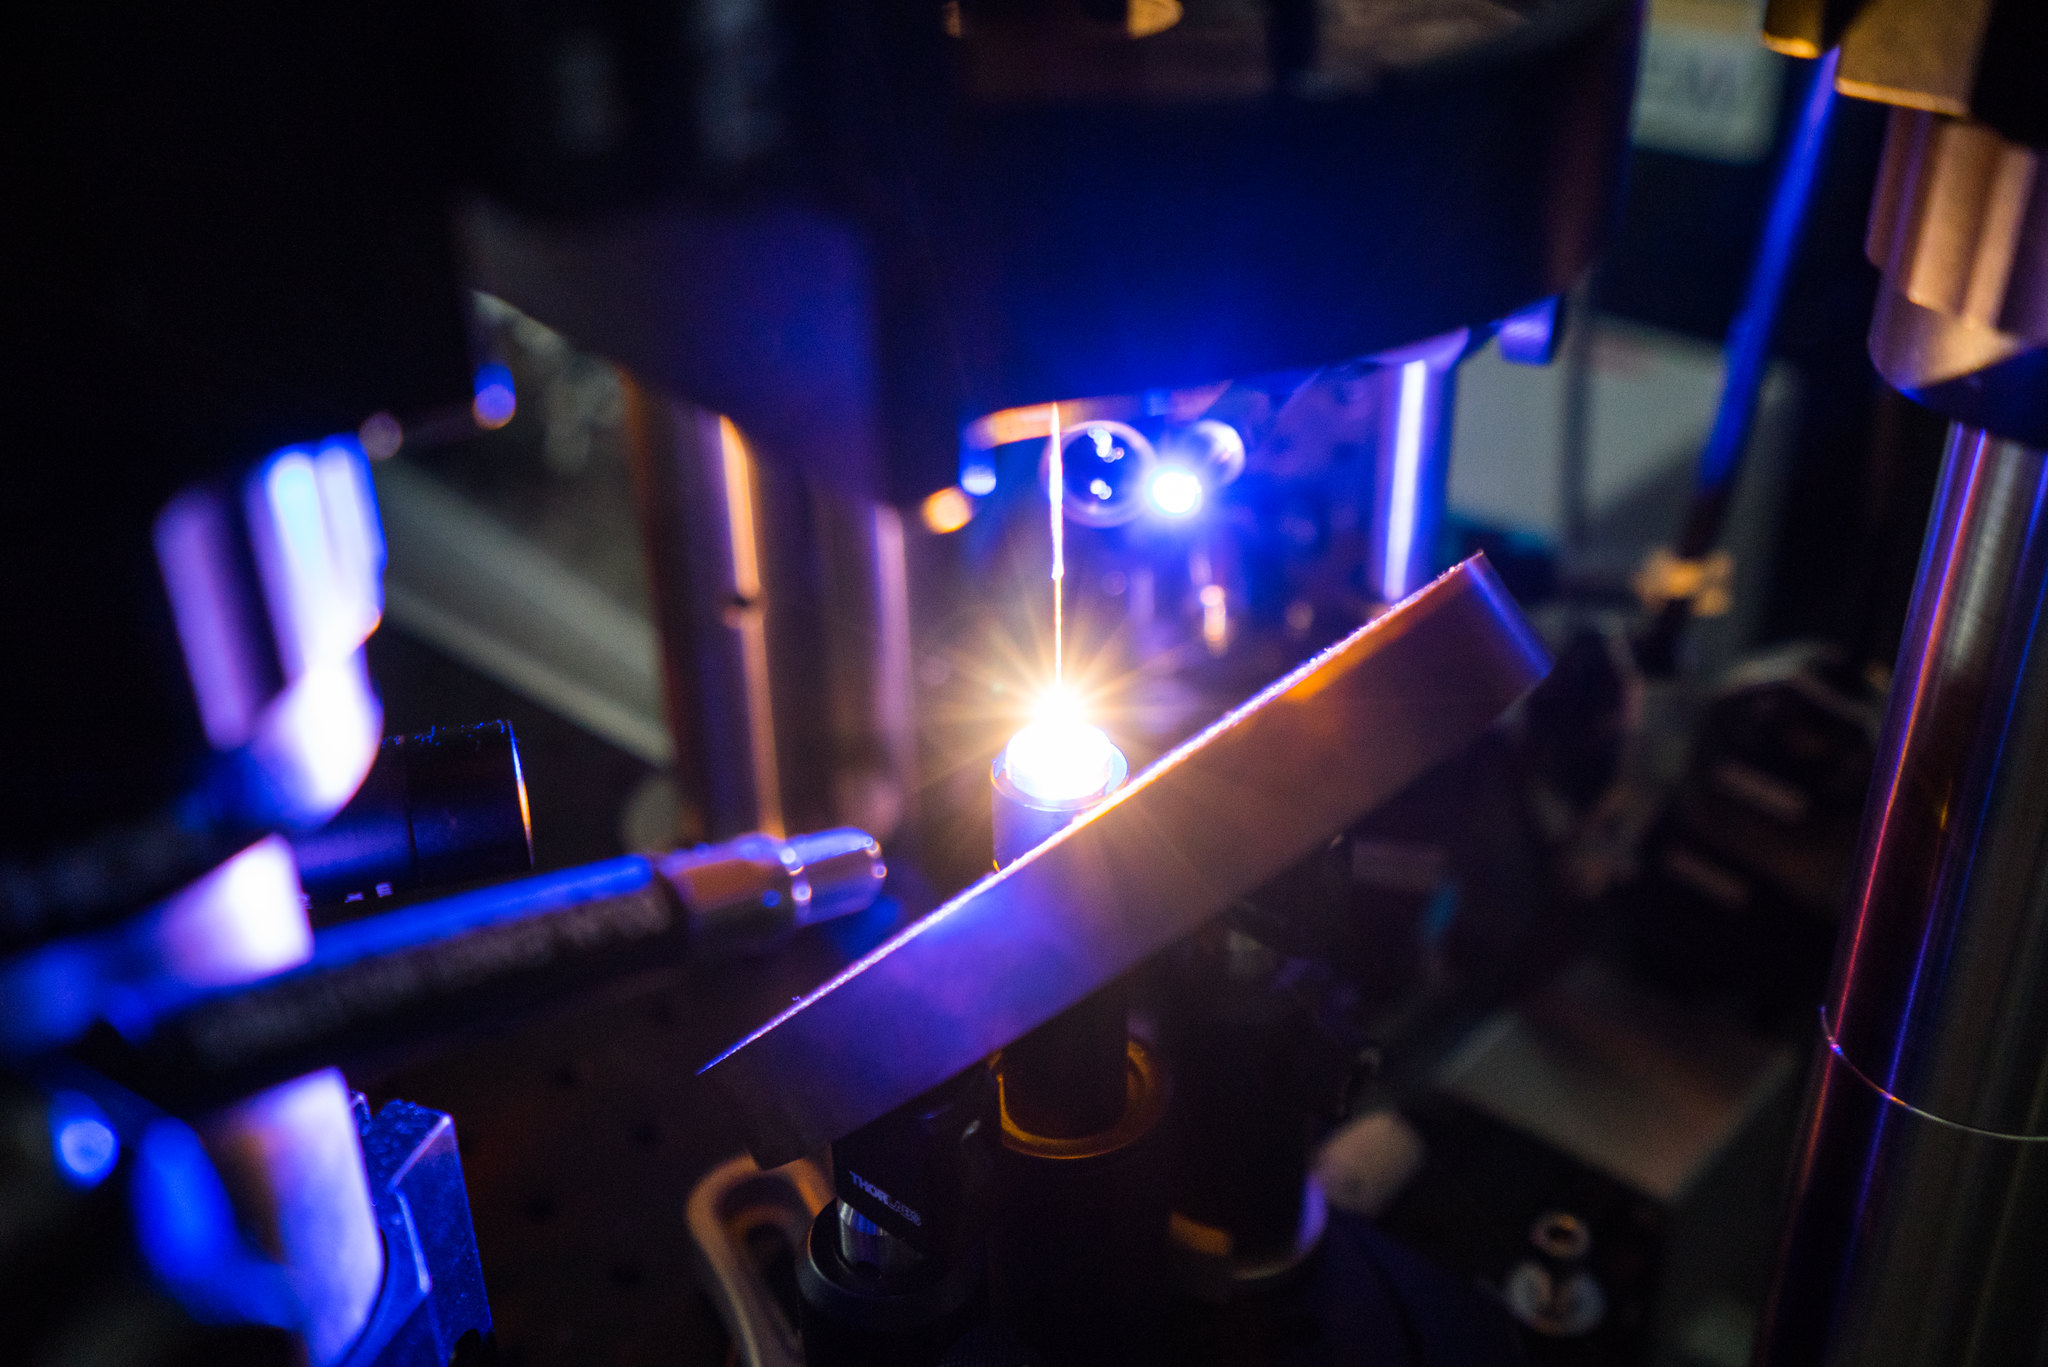 Show here is the focus of a 100-watt CO2 laser. At that focal point, a rod of alumina is being melted and transformed into a pure sapphire optical fiber. 